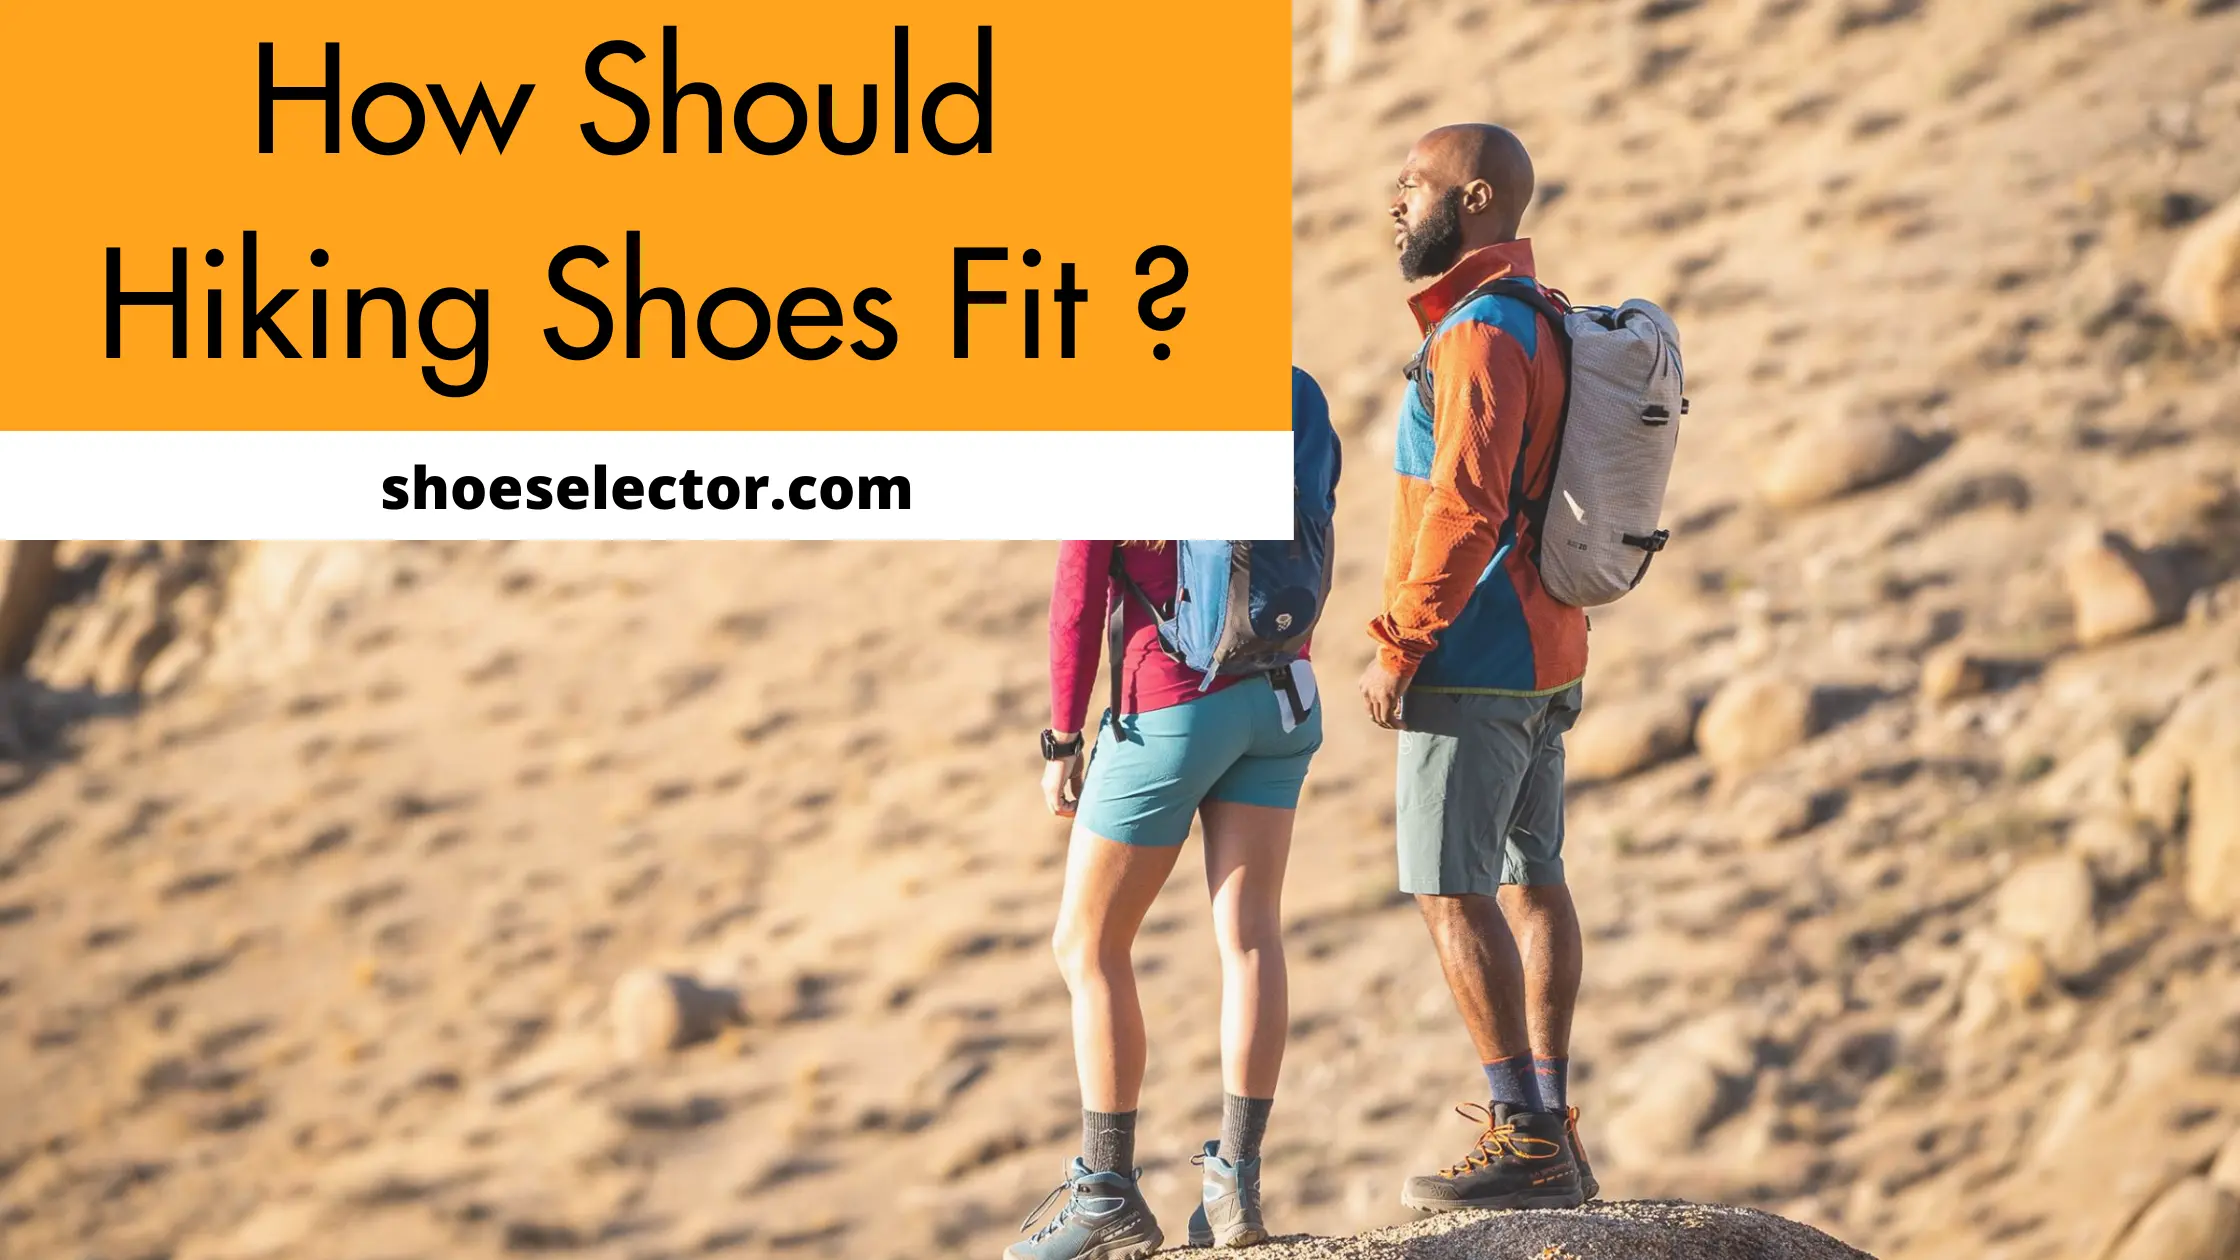 How Should Hiking Shoes Fit? - Easy Guide